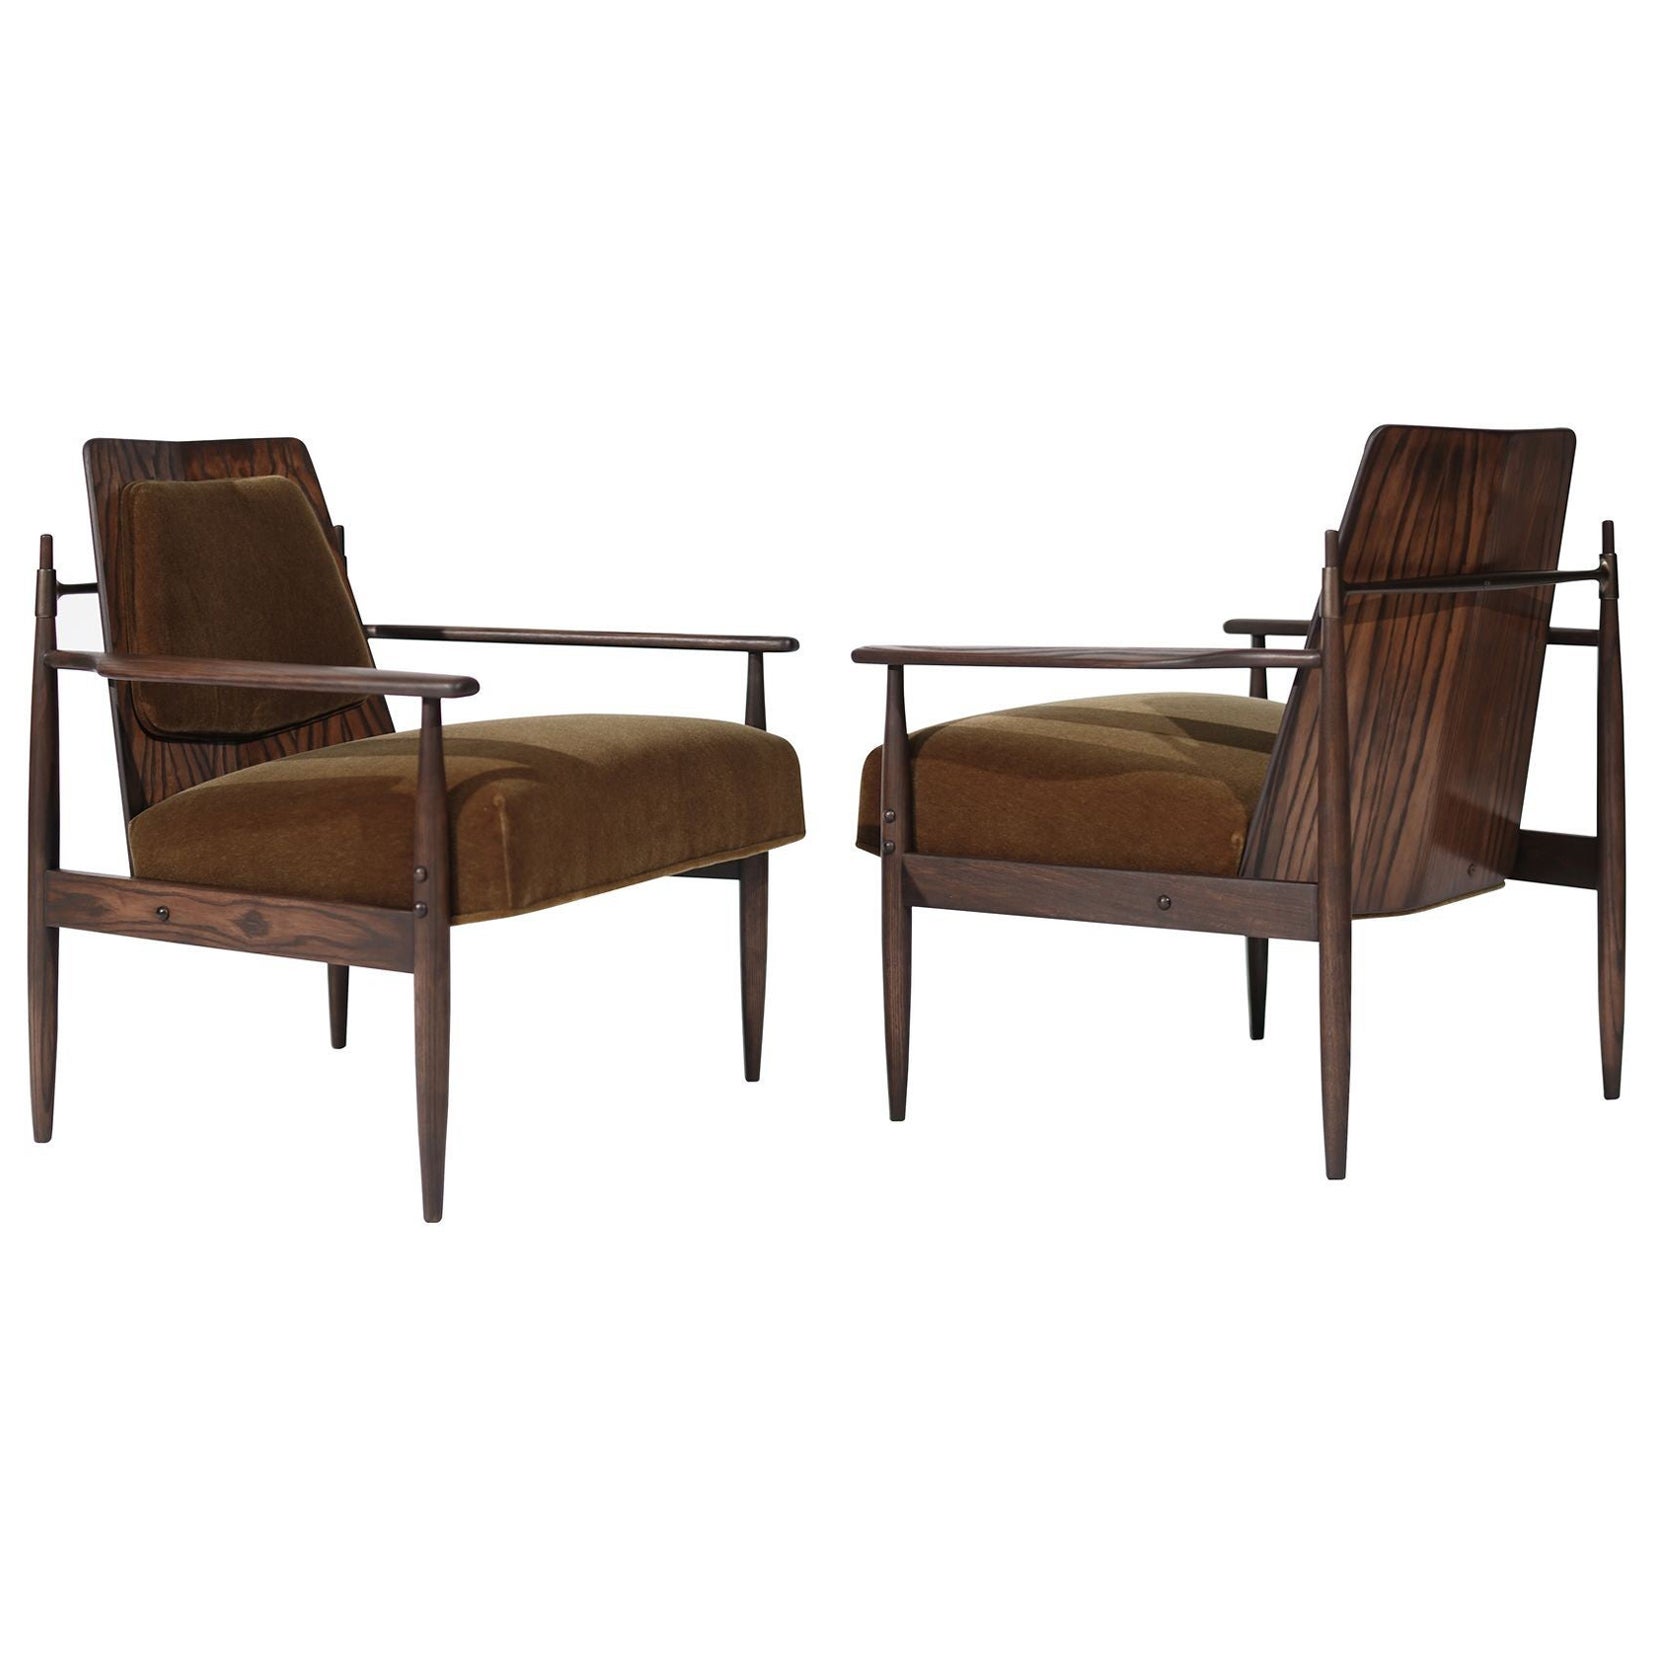 Set of Oak, Mohair and Bronze Lounge Chairs by Dan Johnson, C. 1950s